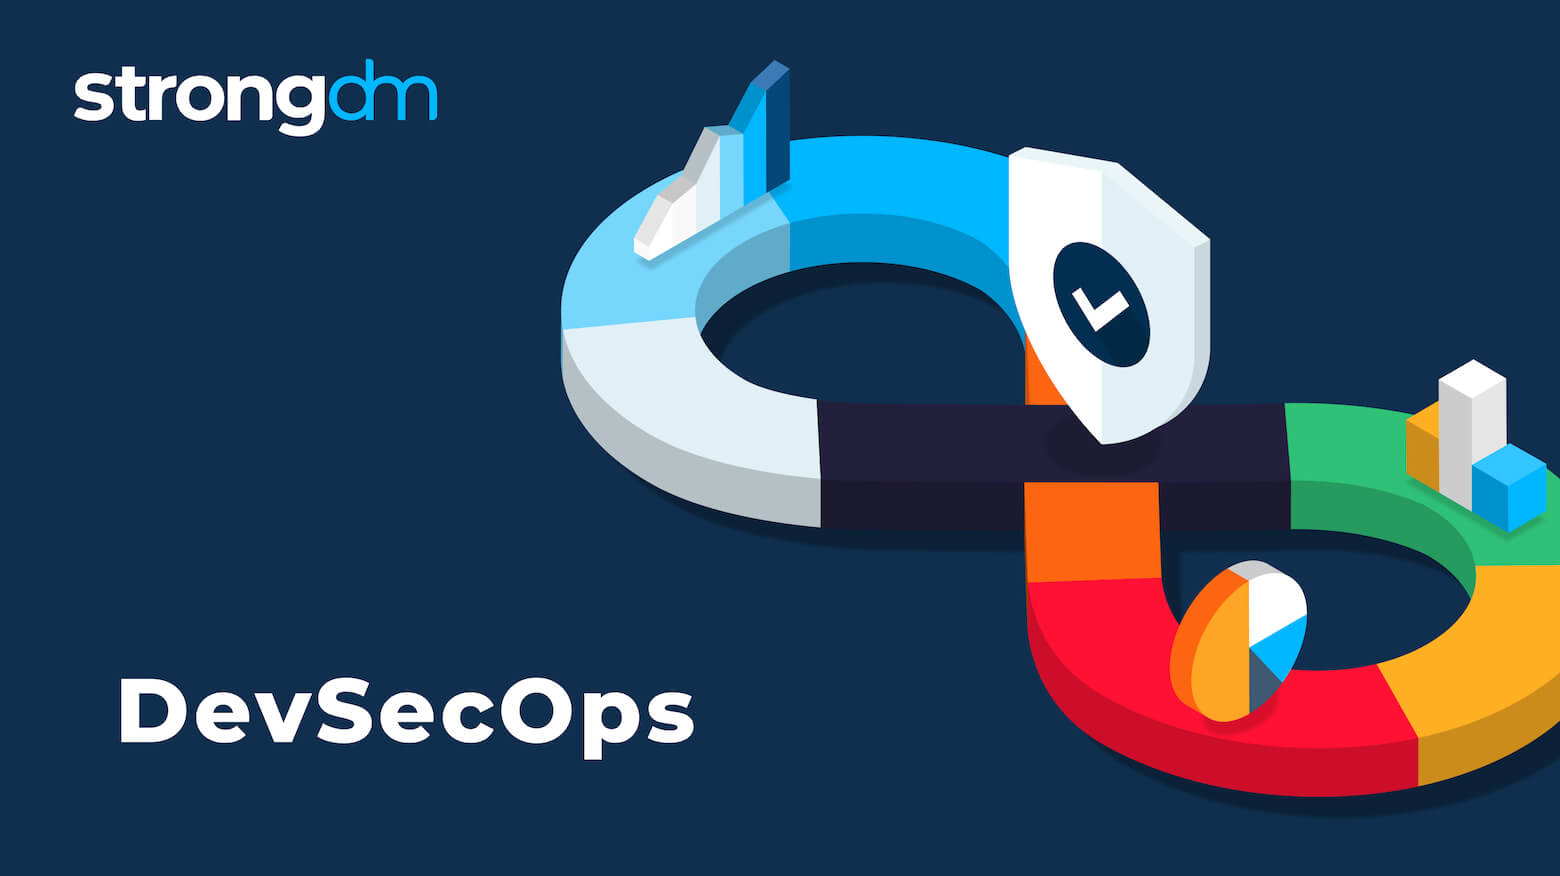 30+ DevSecOps Statistics You Should Know in 2022